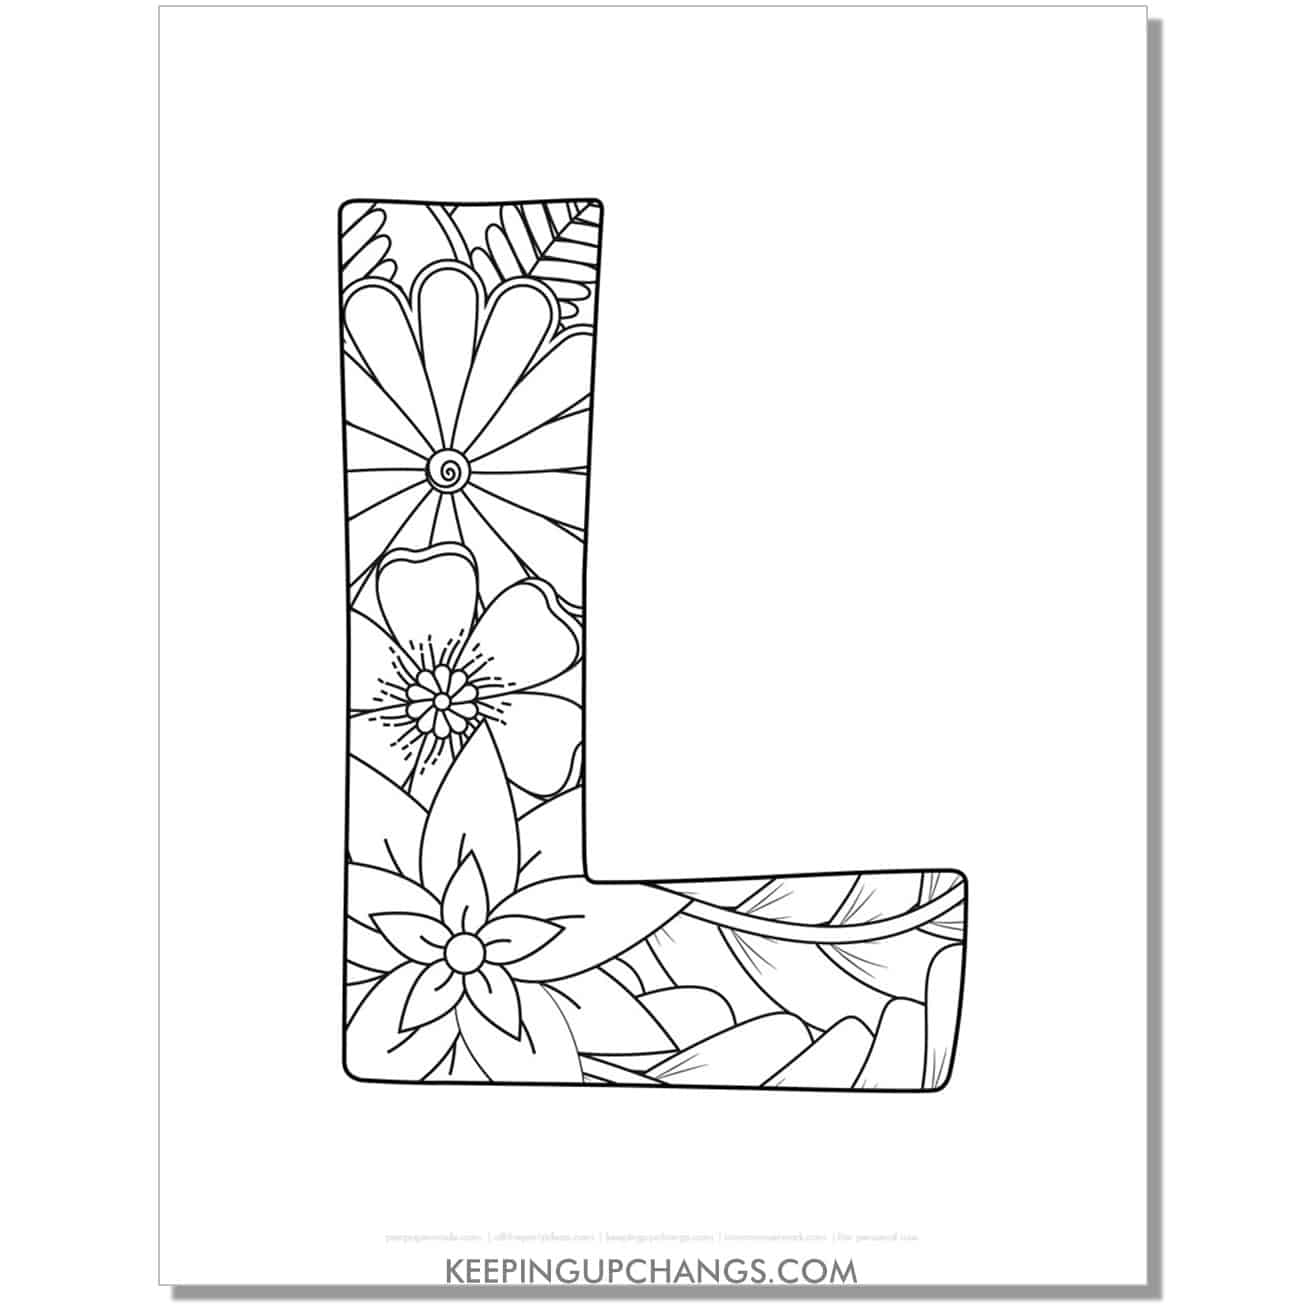 free letter l to color, complex mandala zentangle for adults.